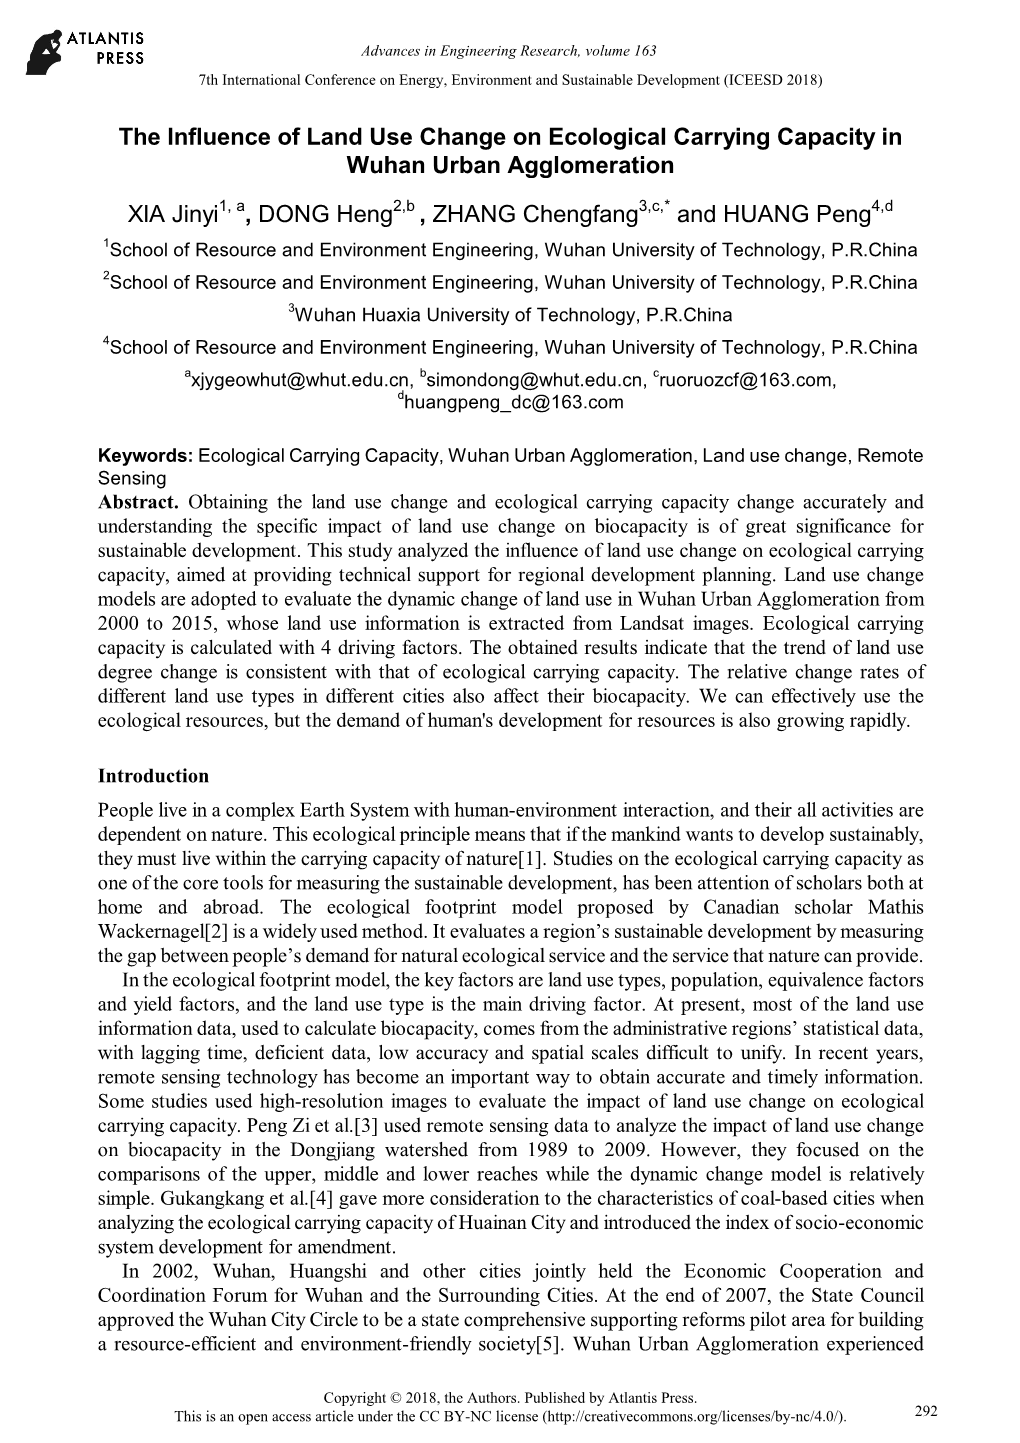 The Influence of Land Use Change on Ecological Carrying Capacity in Wuhan Urban Agglomeration XIA Jinyi , DONG Heng , ZHANG Chen